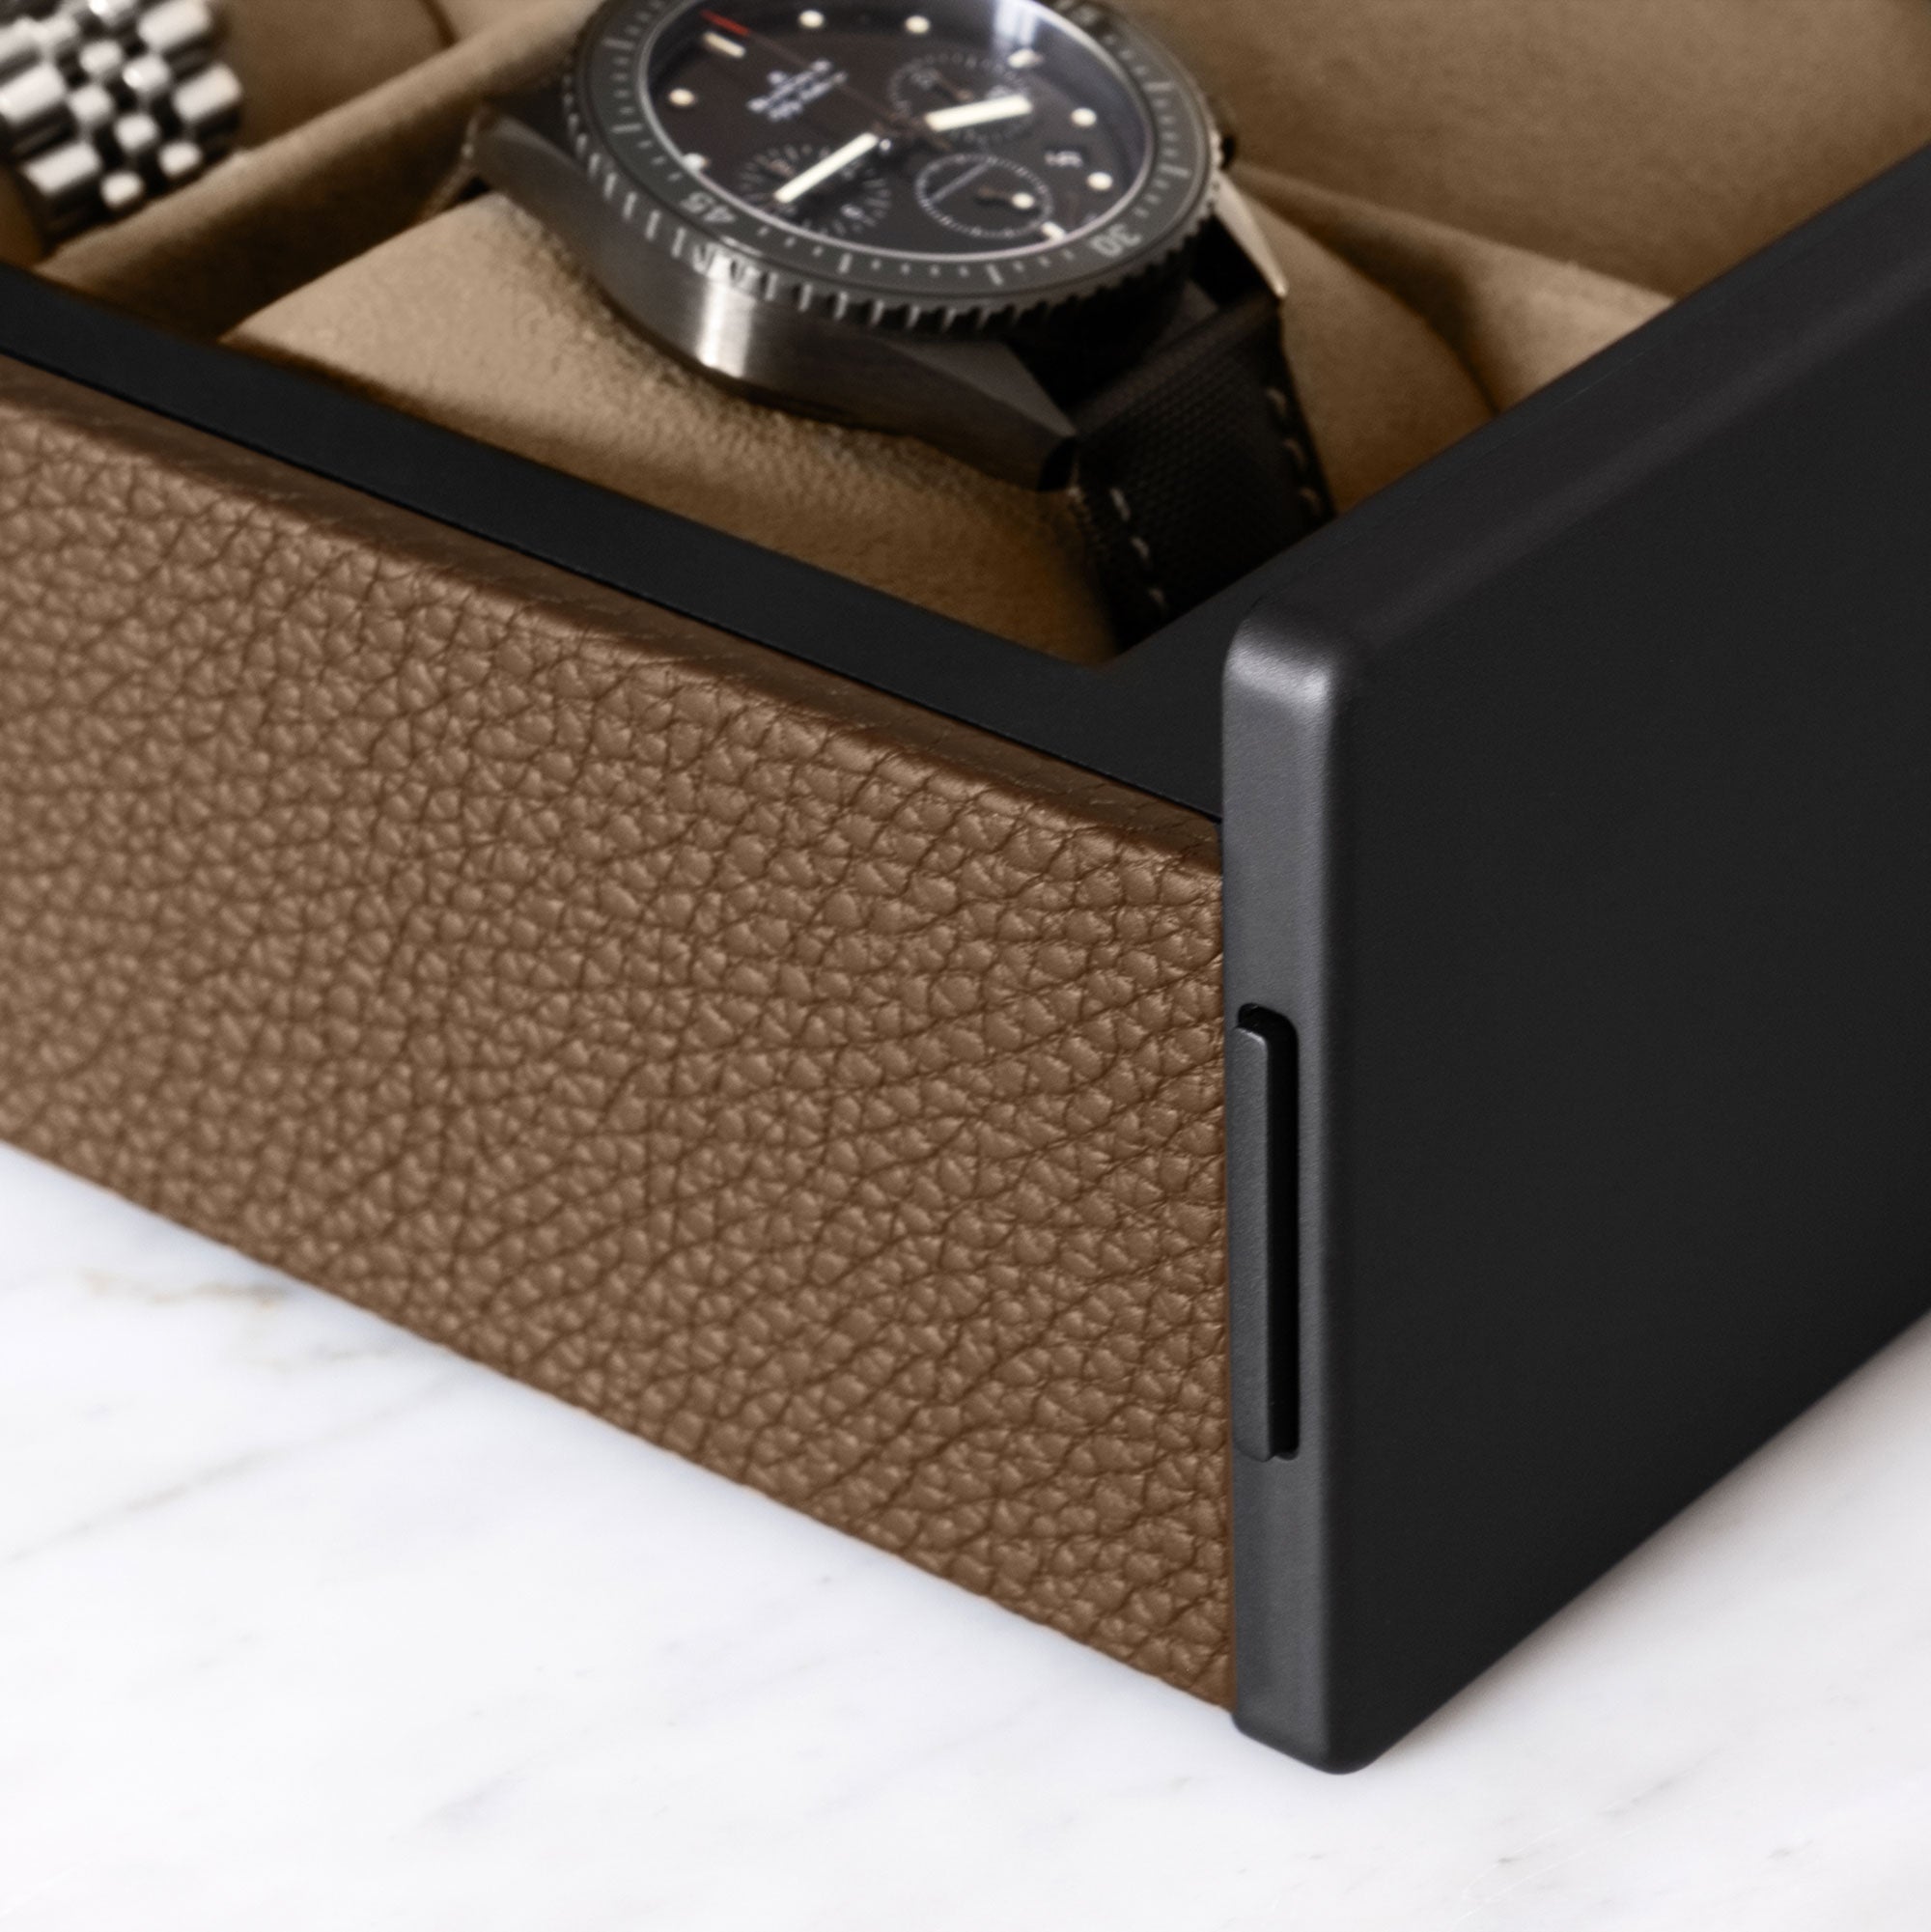 Detail shot of tan leather and black carbon fiber and anodized aluminum of the luxury watch box by Charles Simon